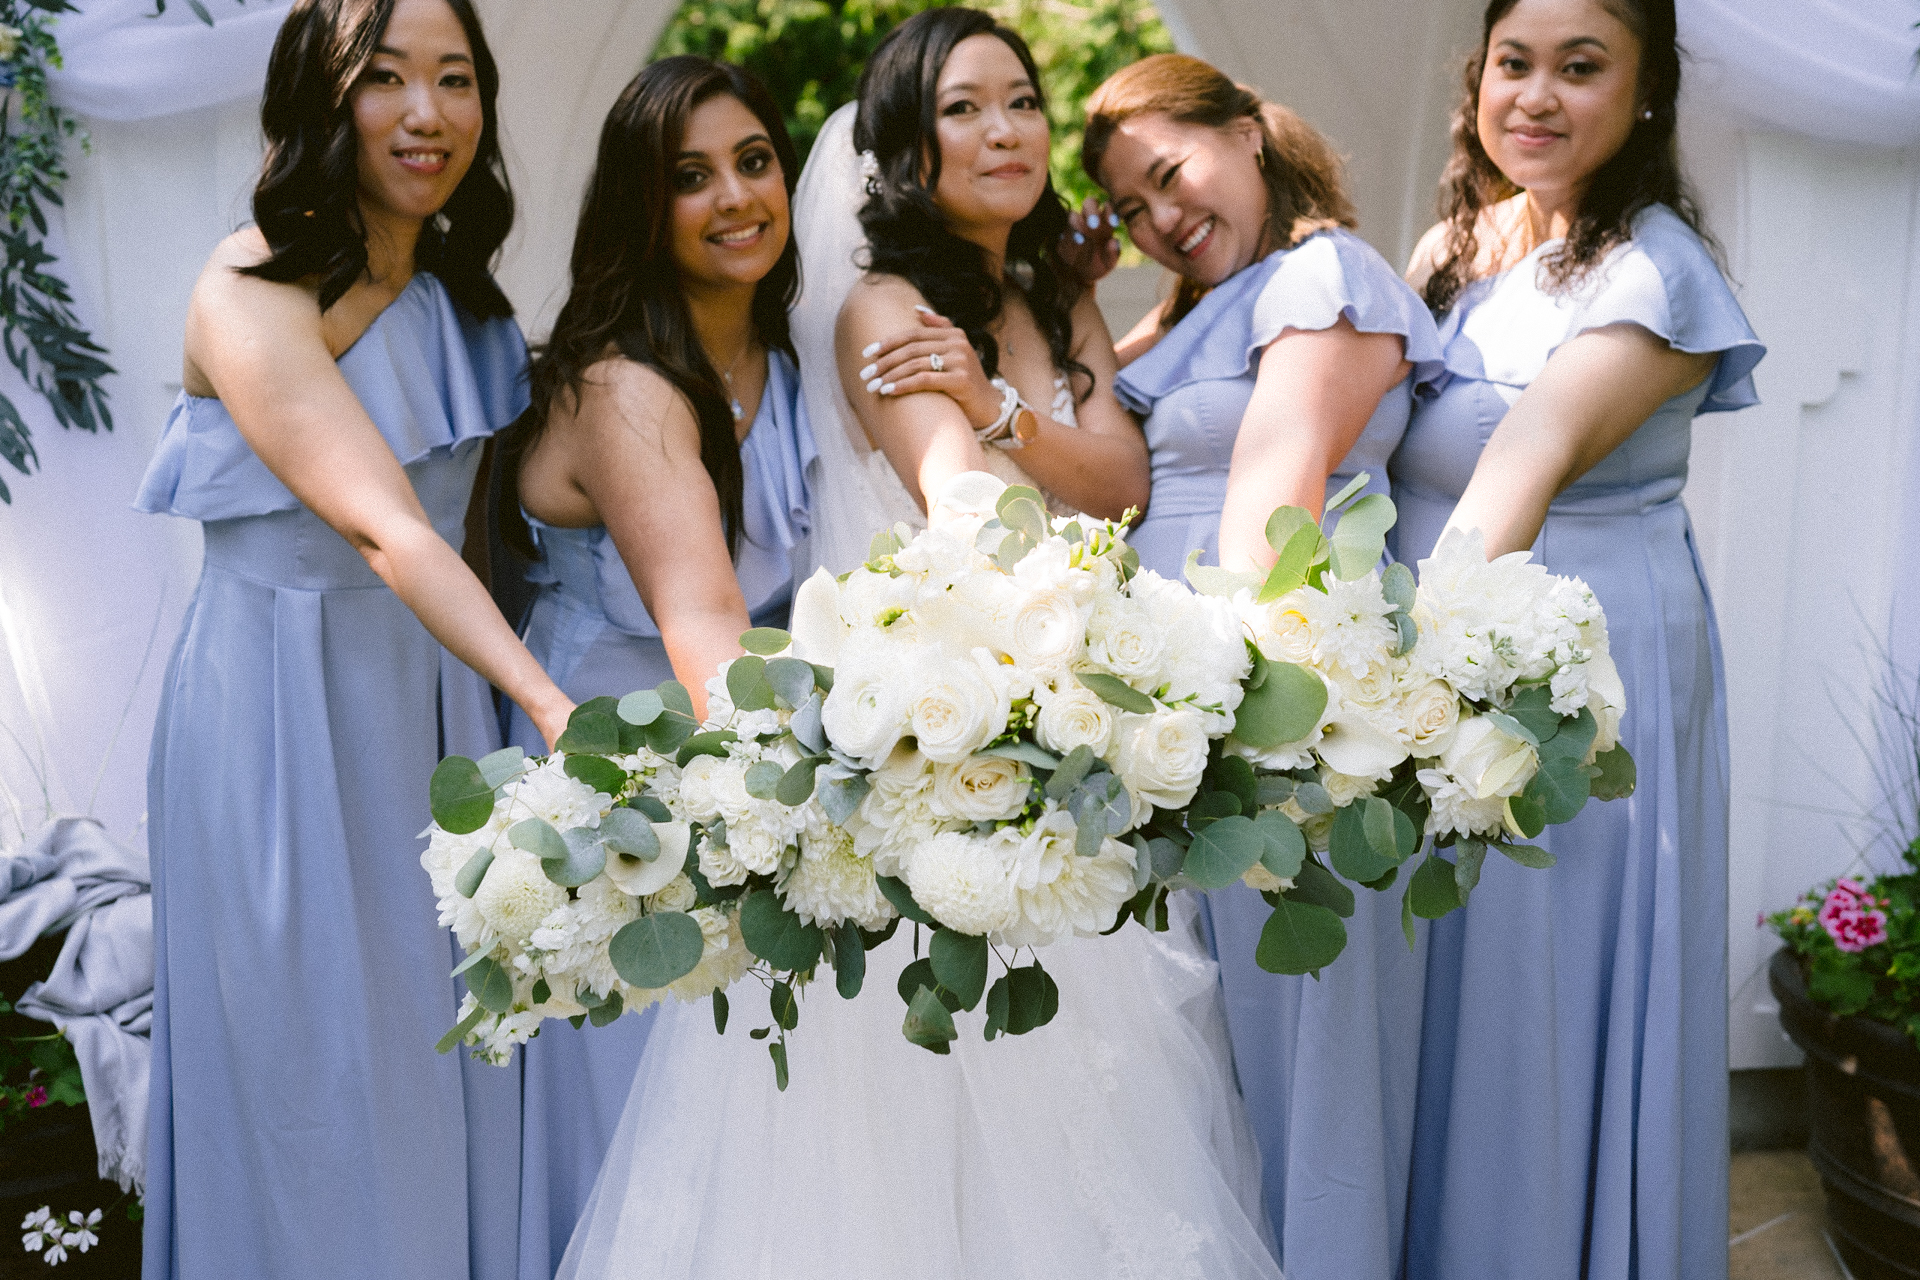 A bride and her bridesmaids in blue dresses holding bouquets of white flowers.